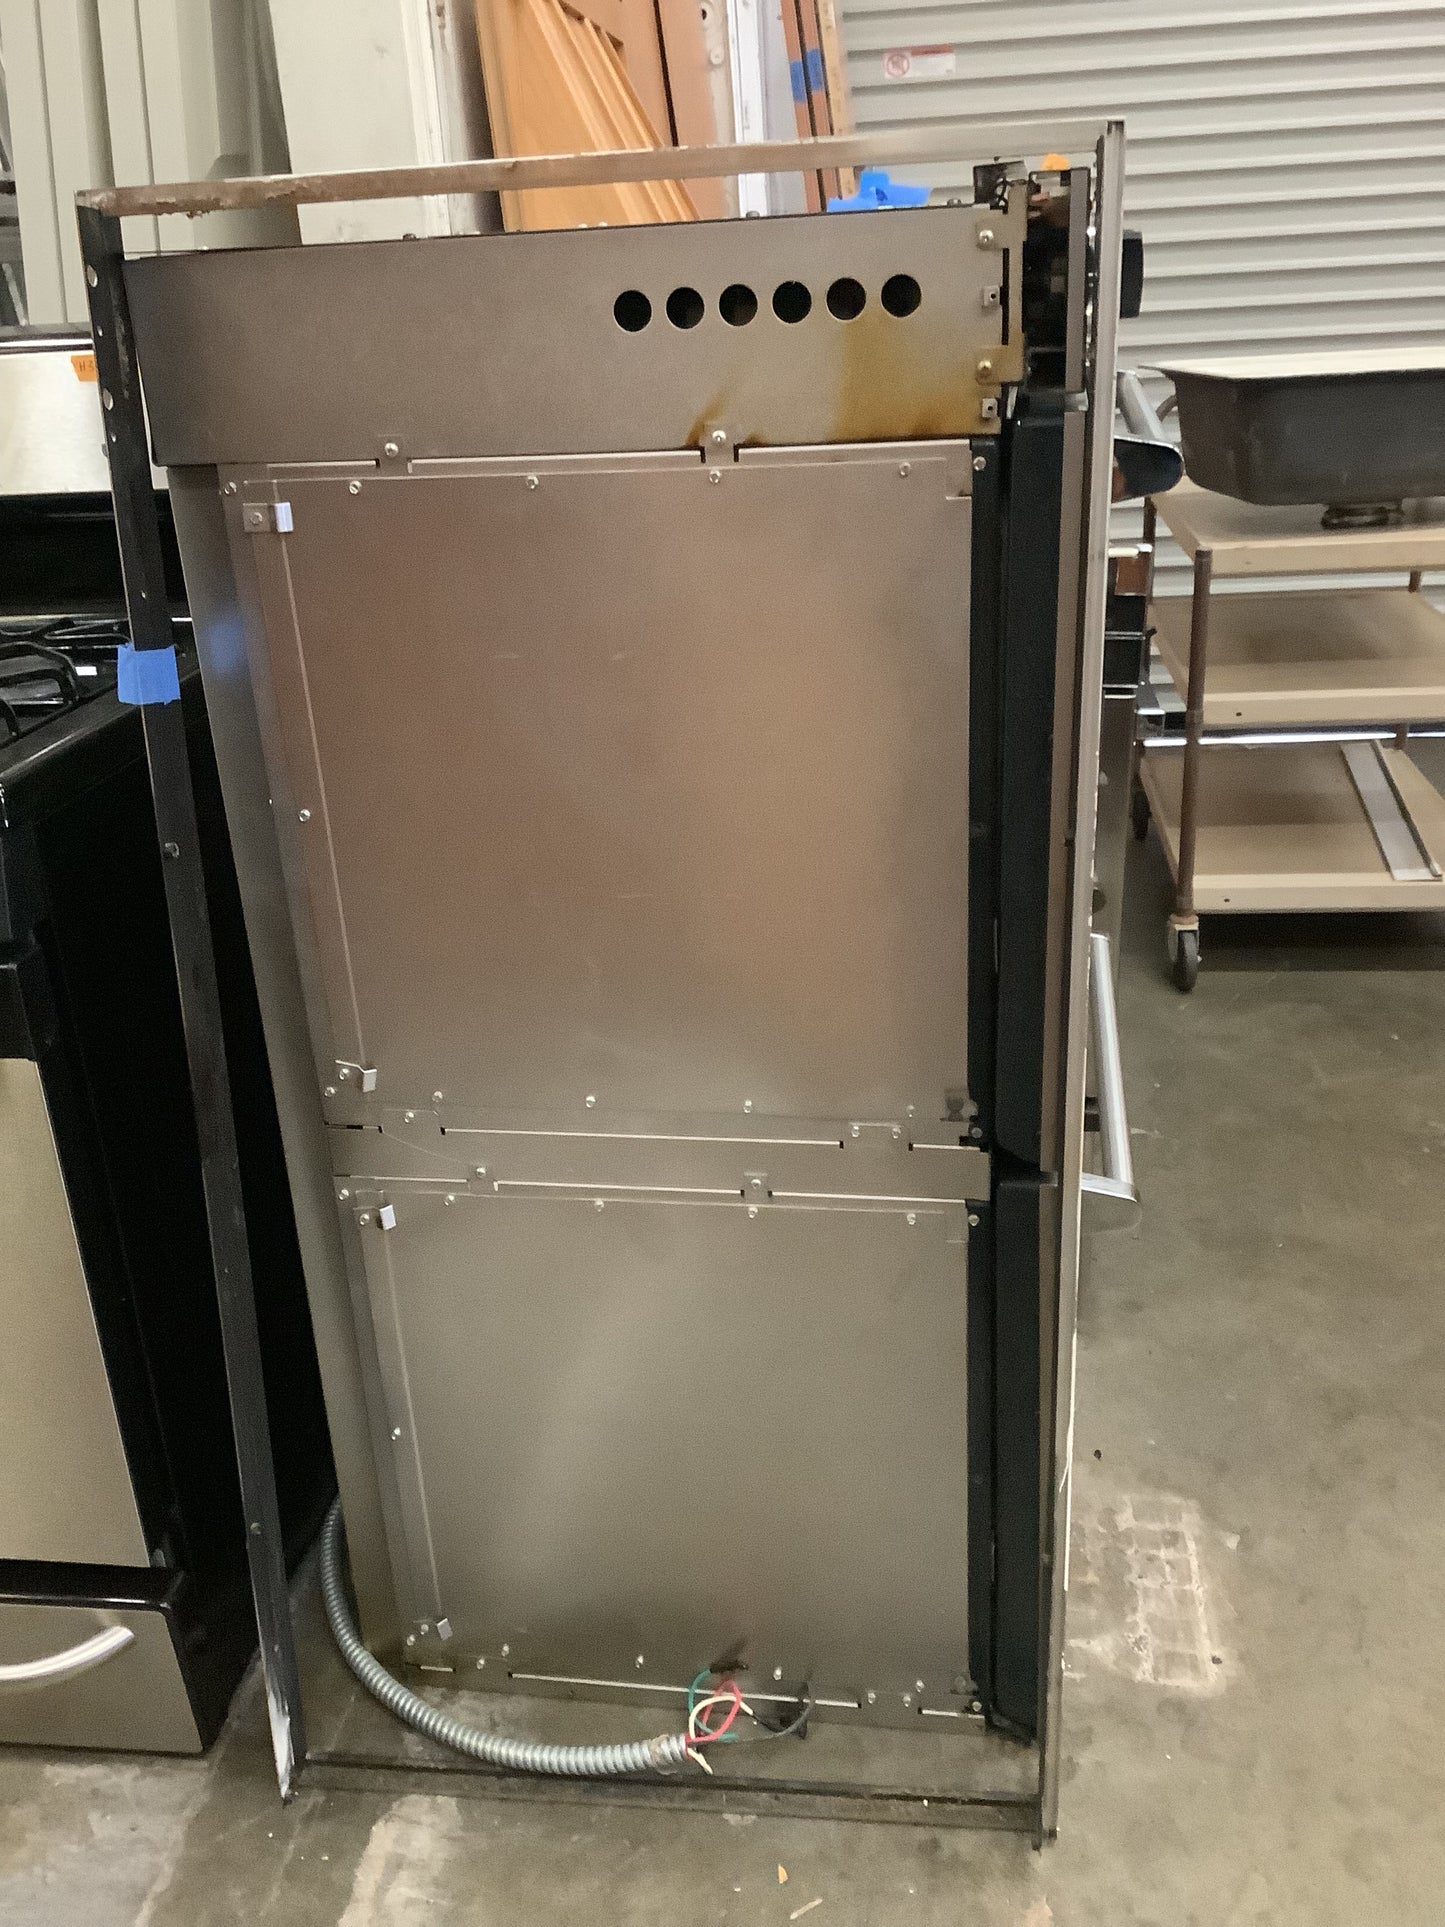 Viking Double Stacked Oven